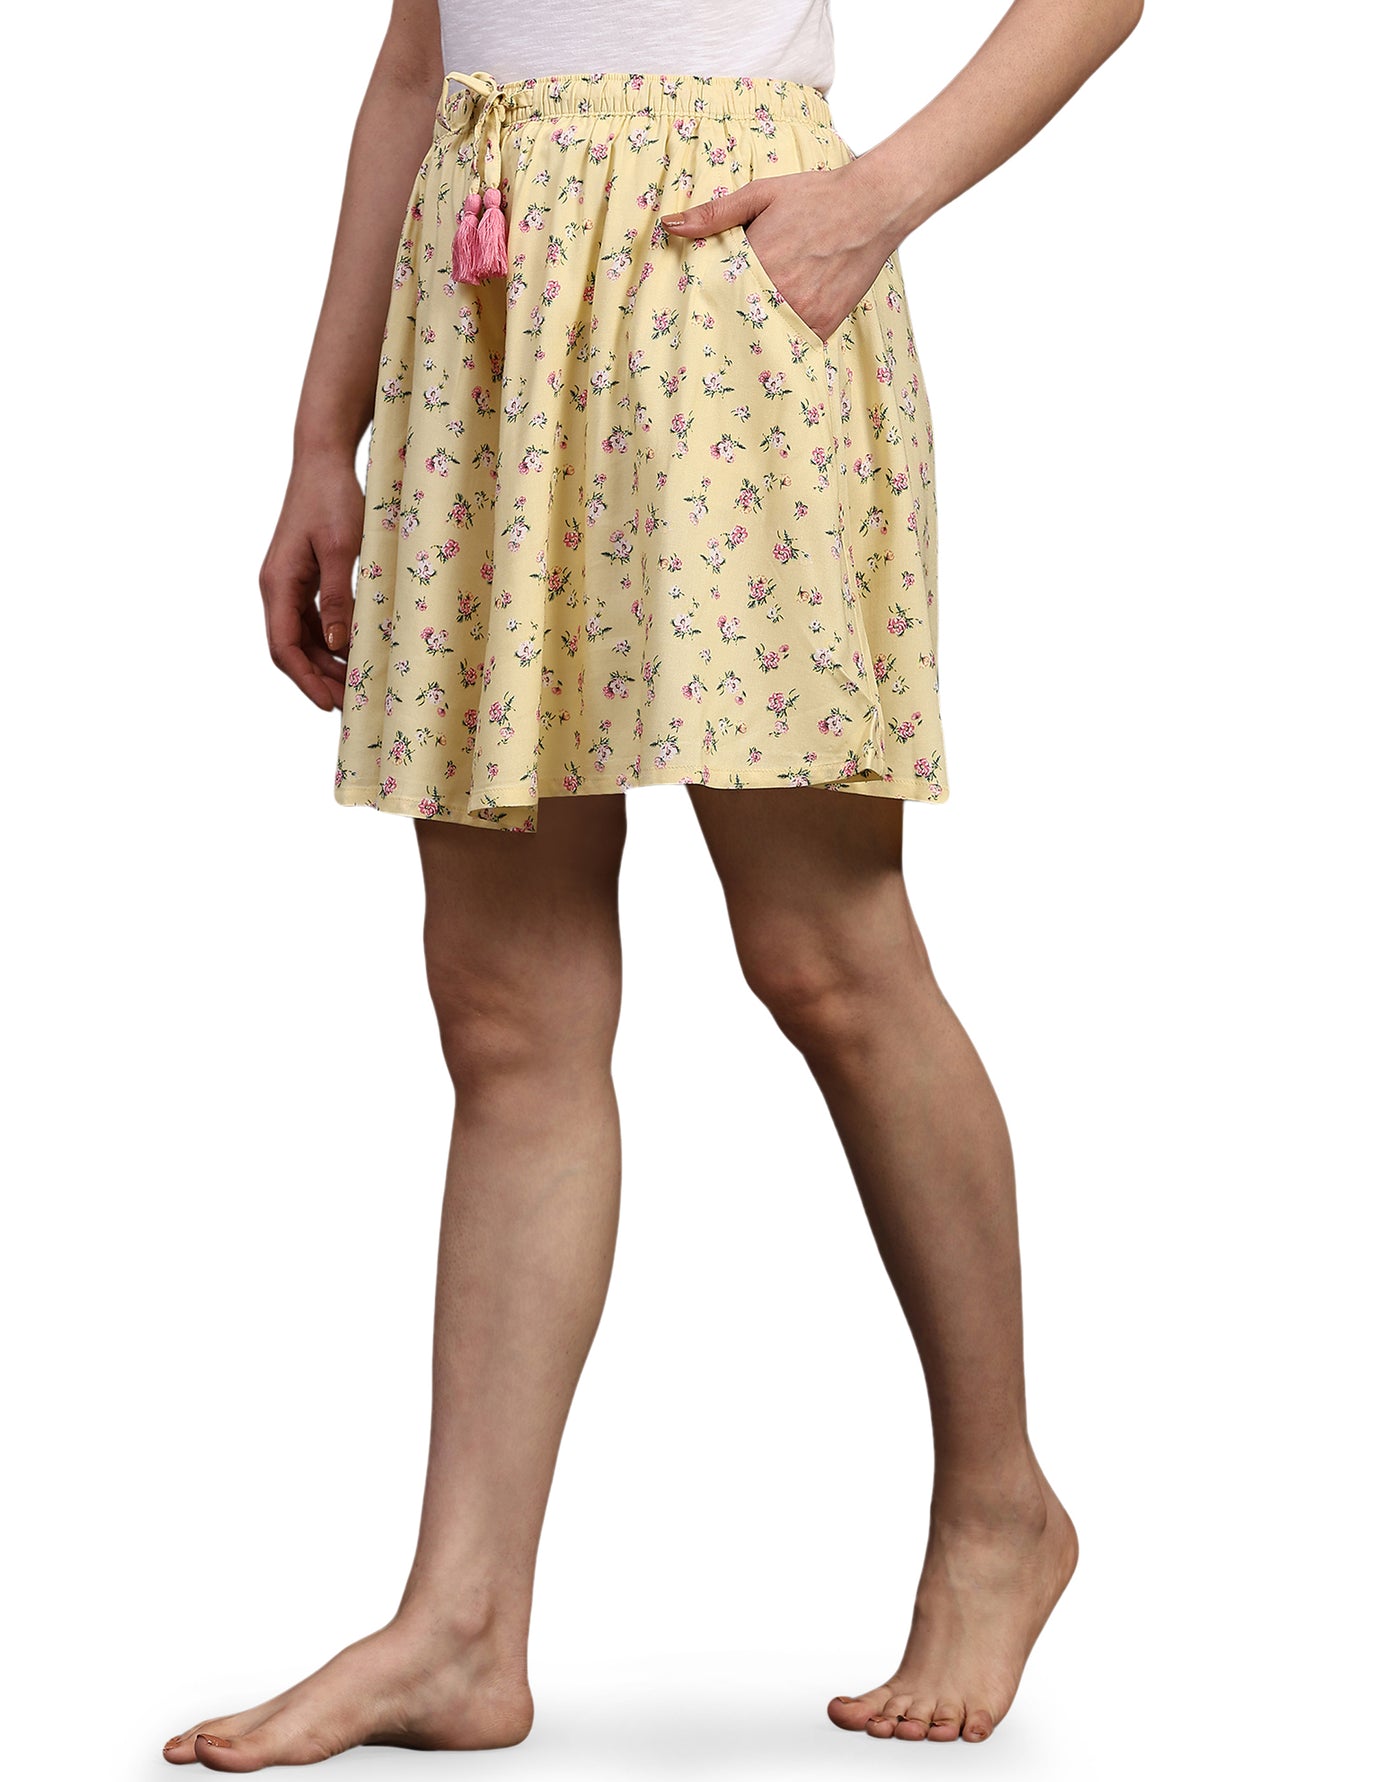 Culottes Shorts for Women-Yellow Floral